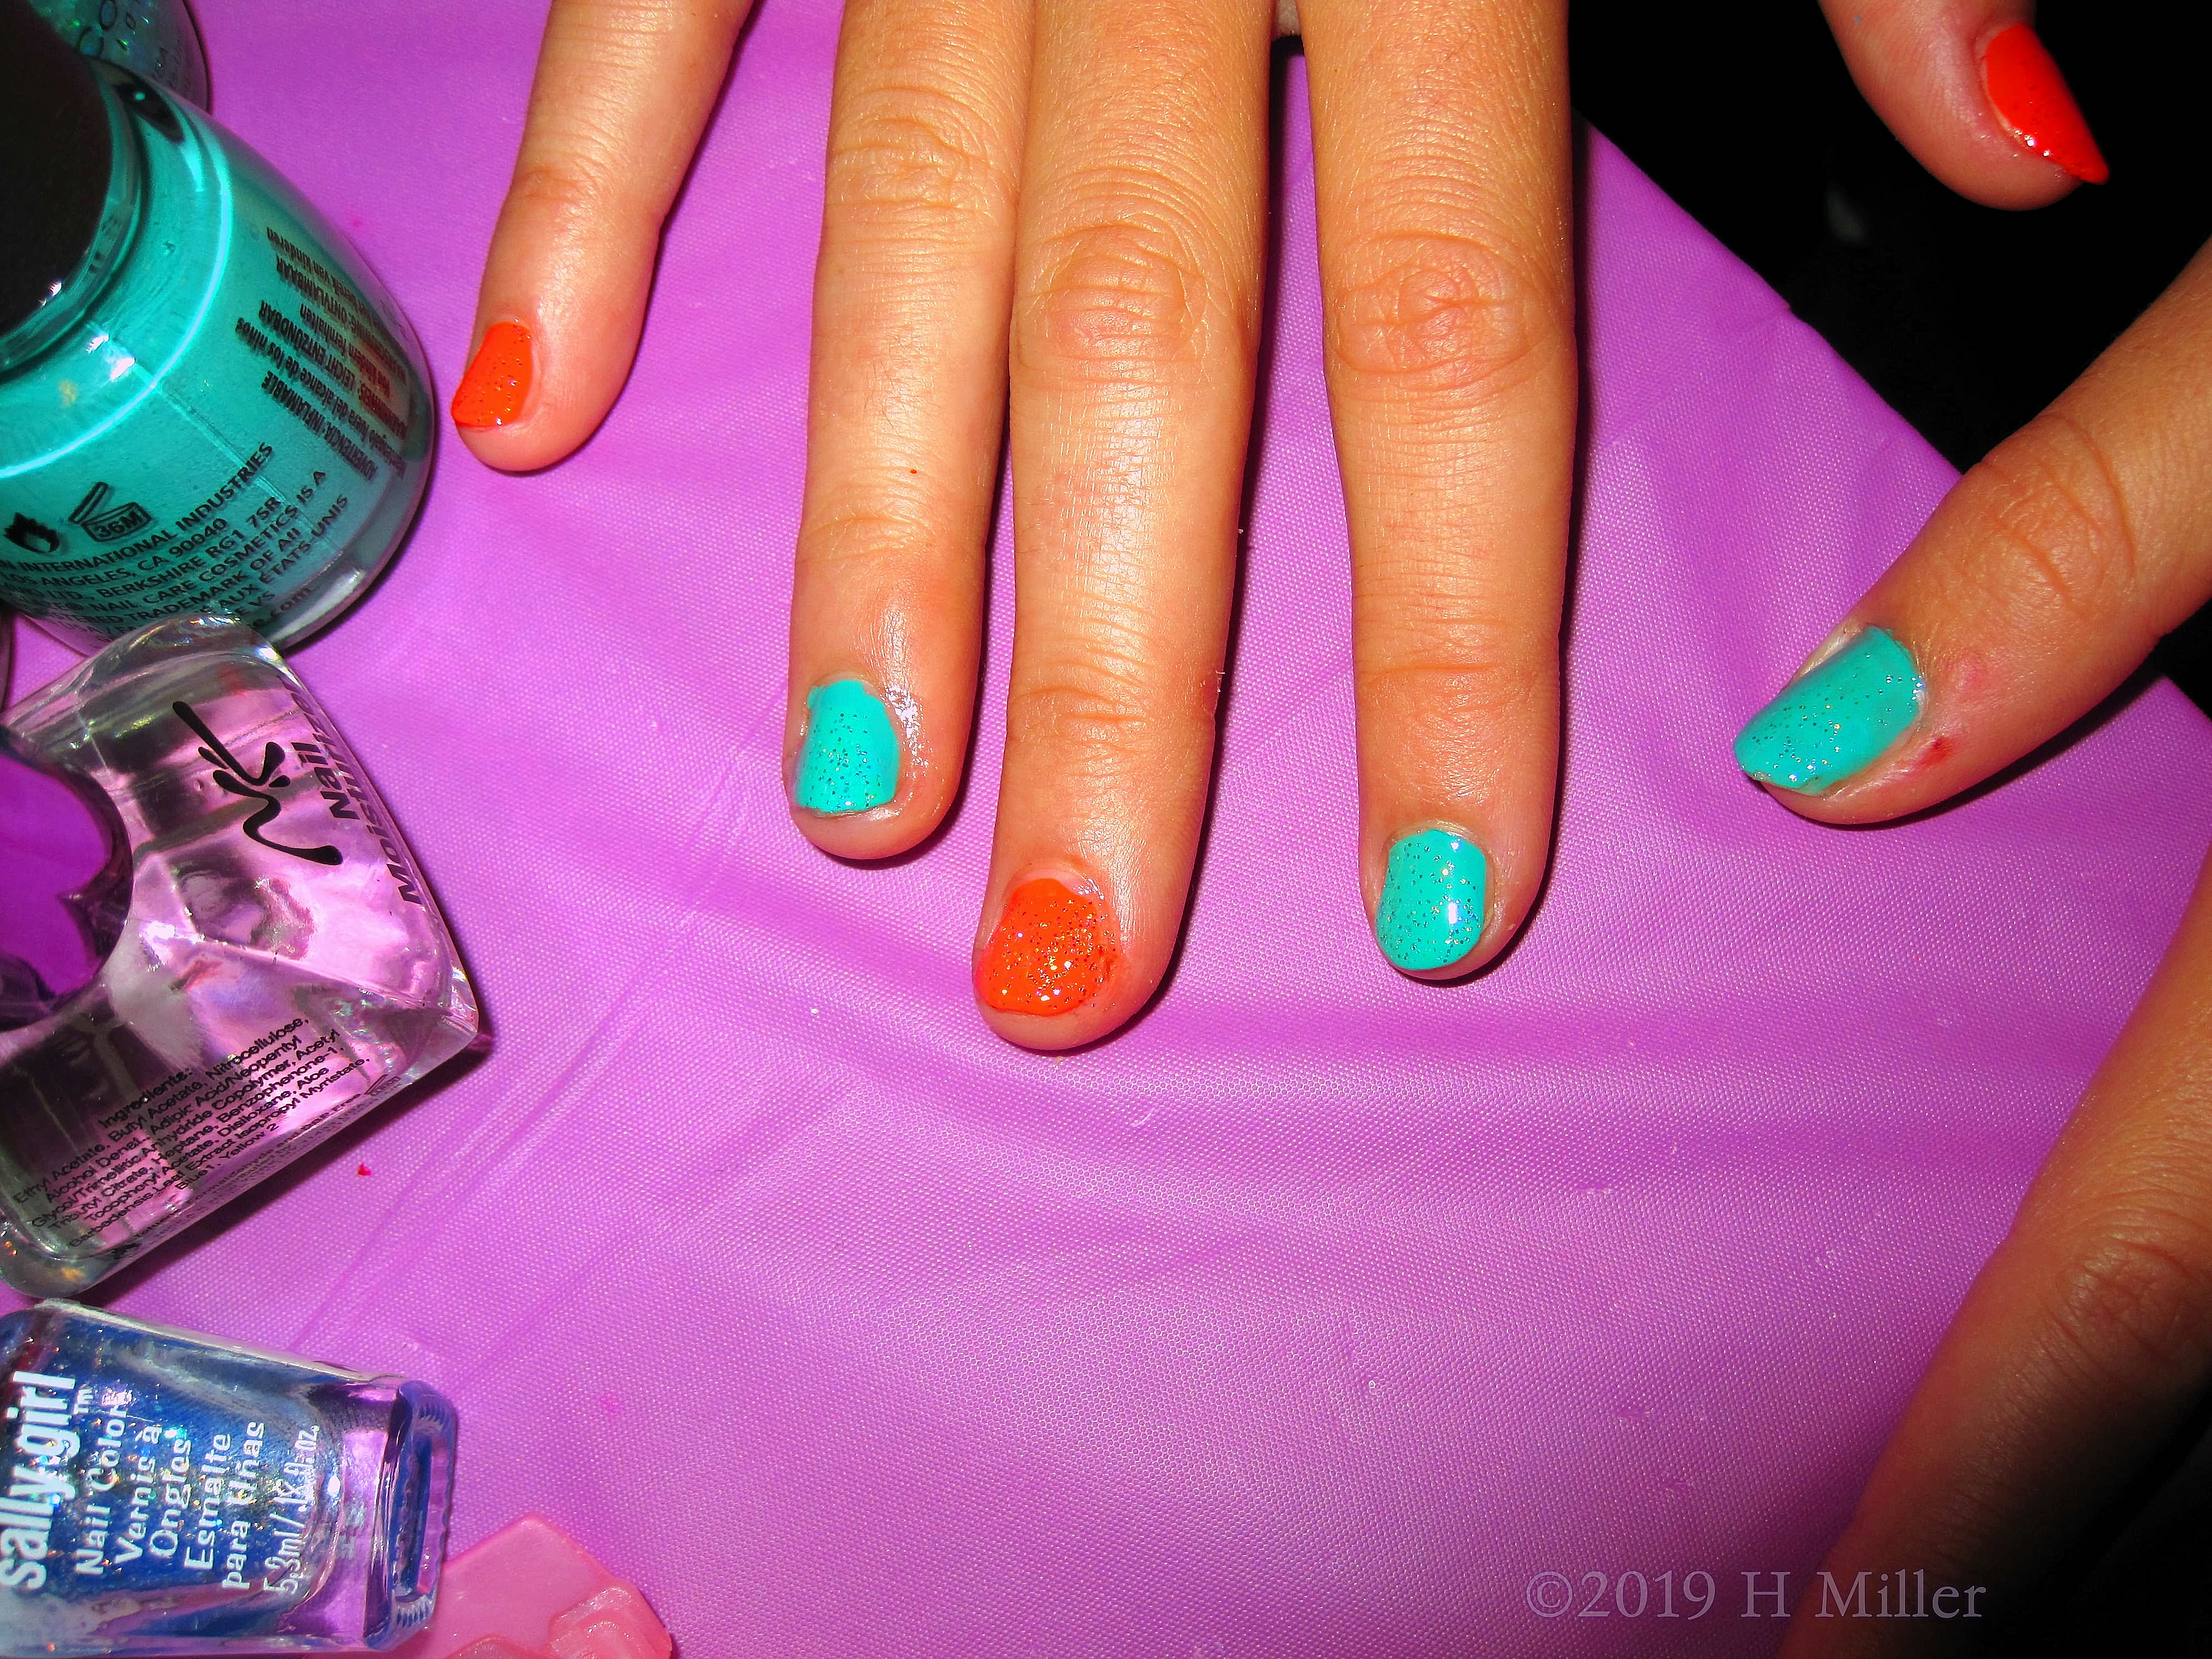 Turquoise And Red Alternate Nail Design For This Kids Manicure!